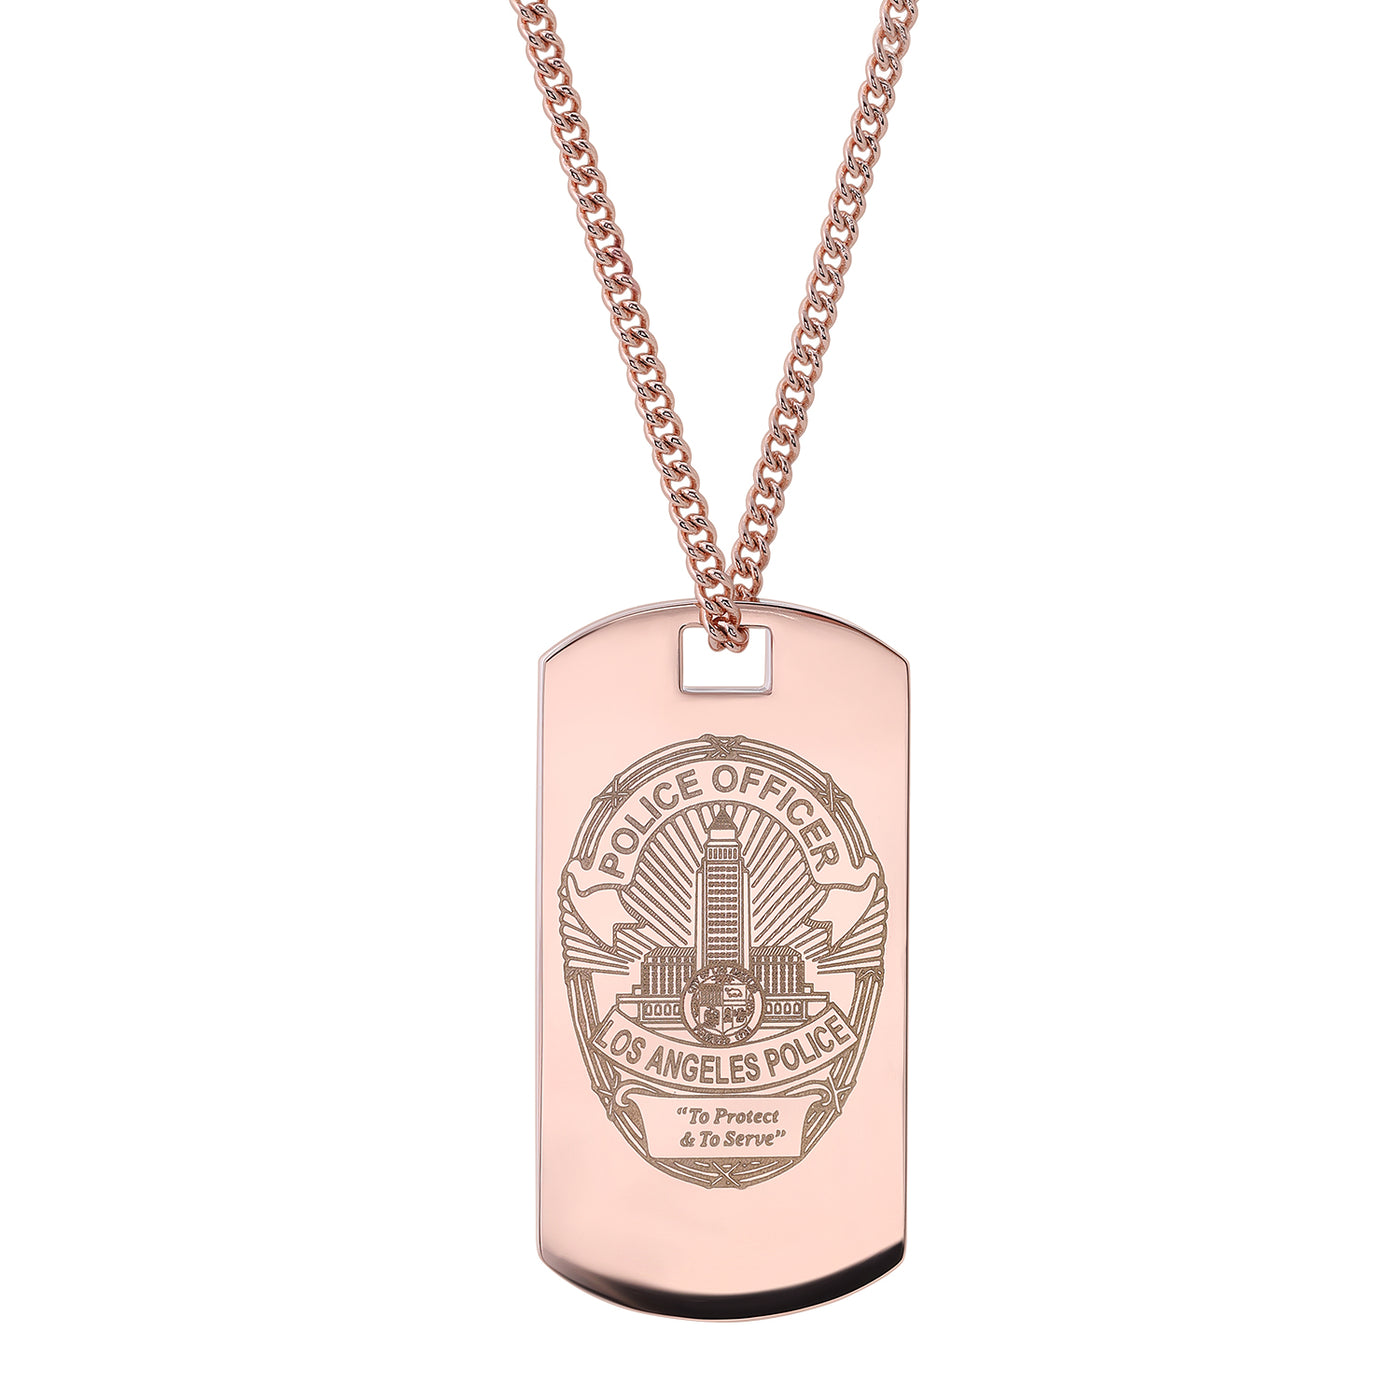 Solidarity Dog Tag Necklace in Rose Gold Plated